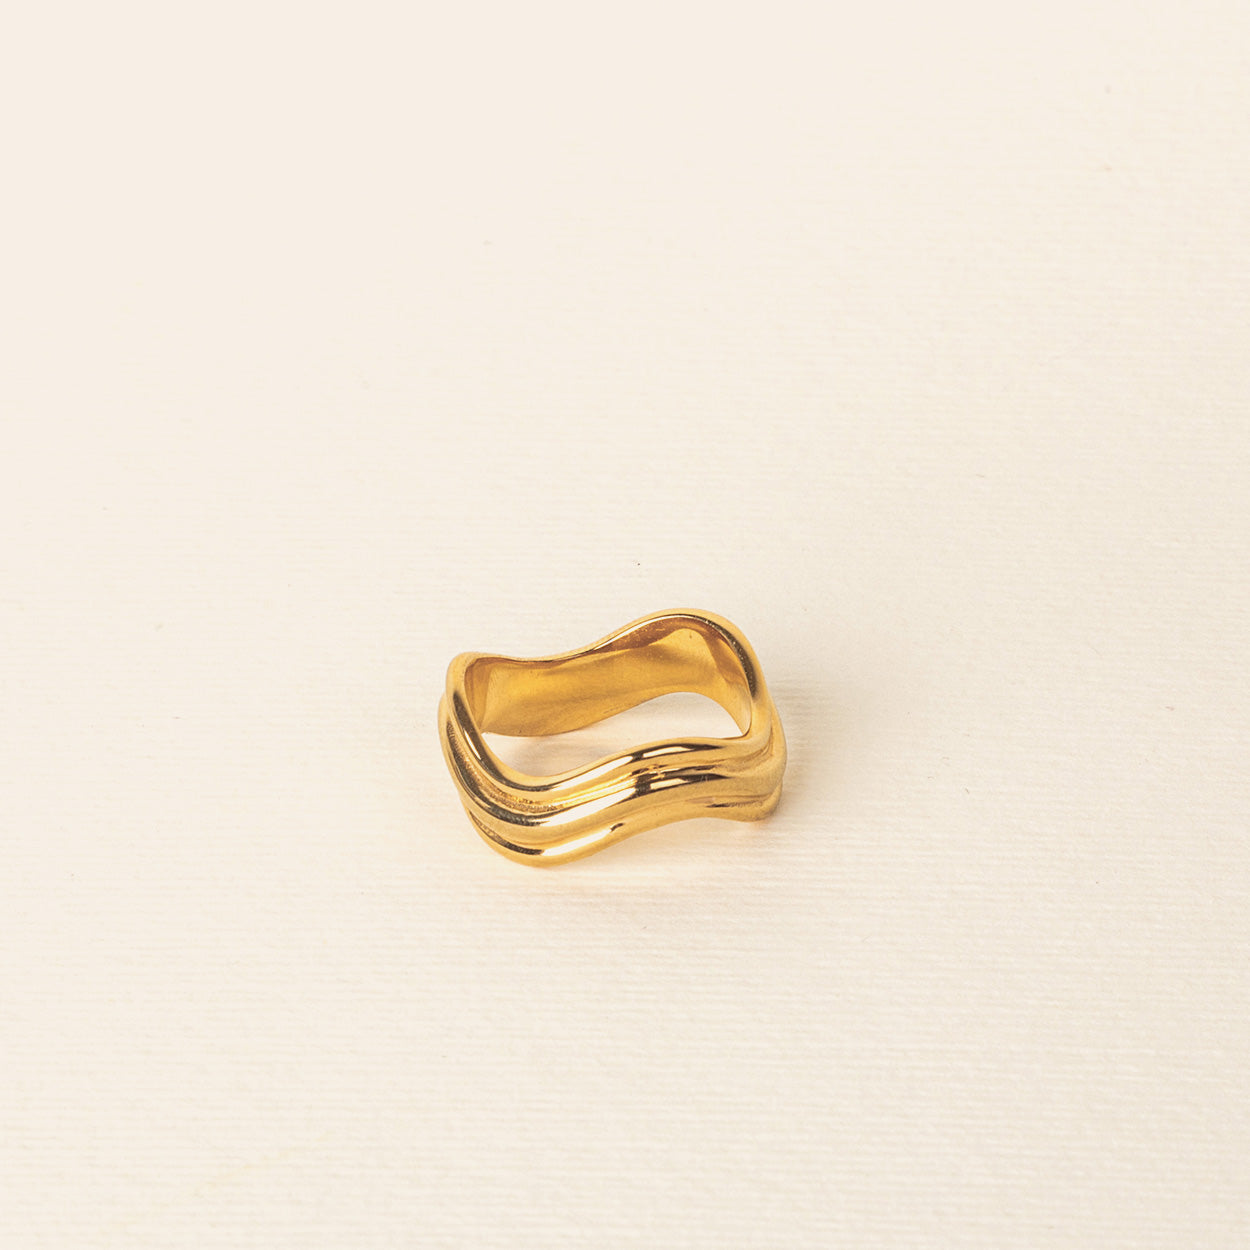 Image of the Triple Wave Ring features a non-tarnish, water-resistant stainless steel core plated in 18K gold. This item is sold as one item and cannot be adjusted.